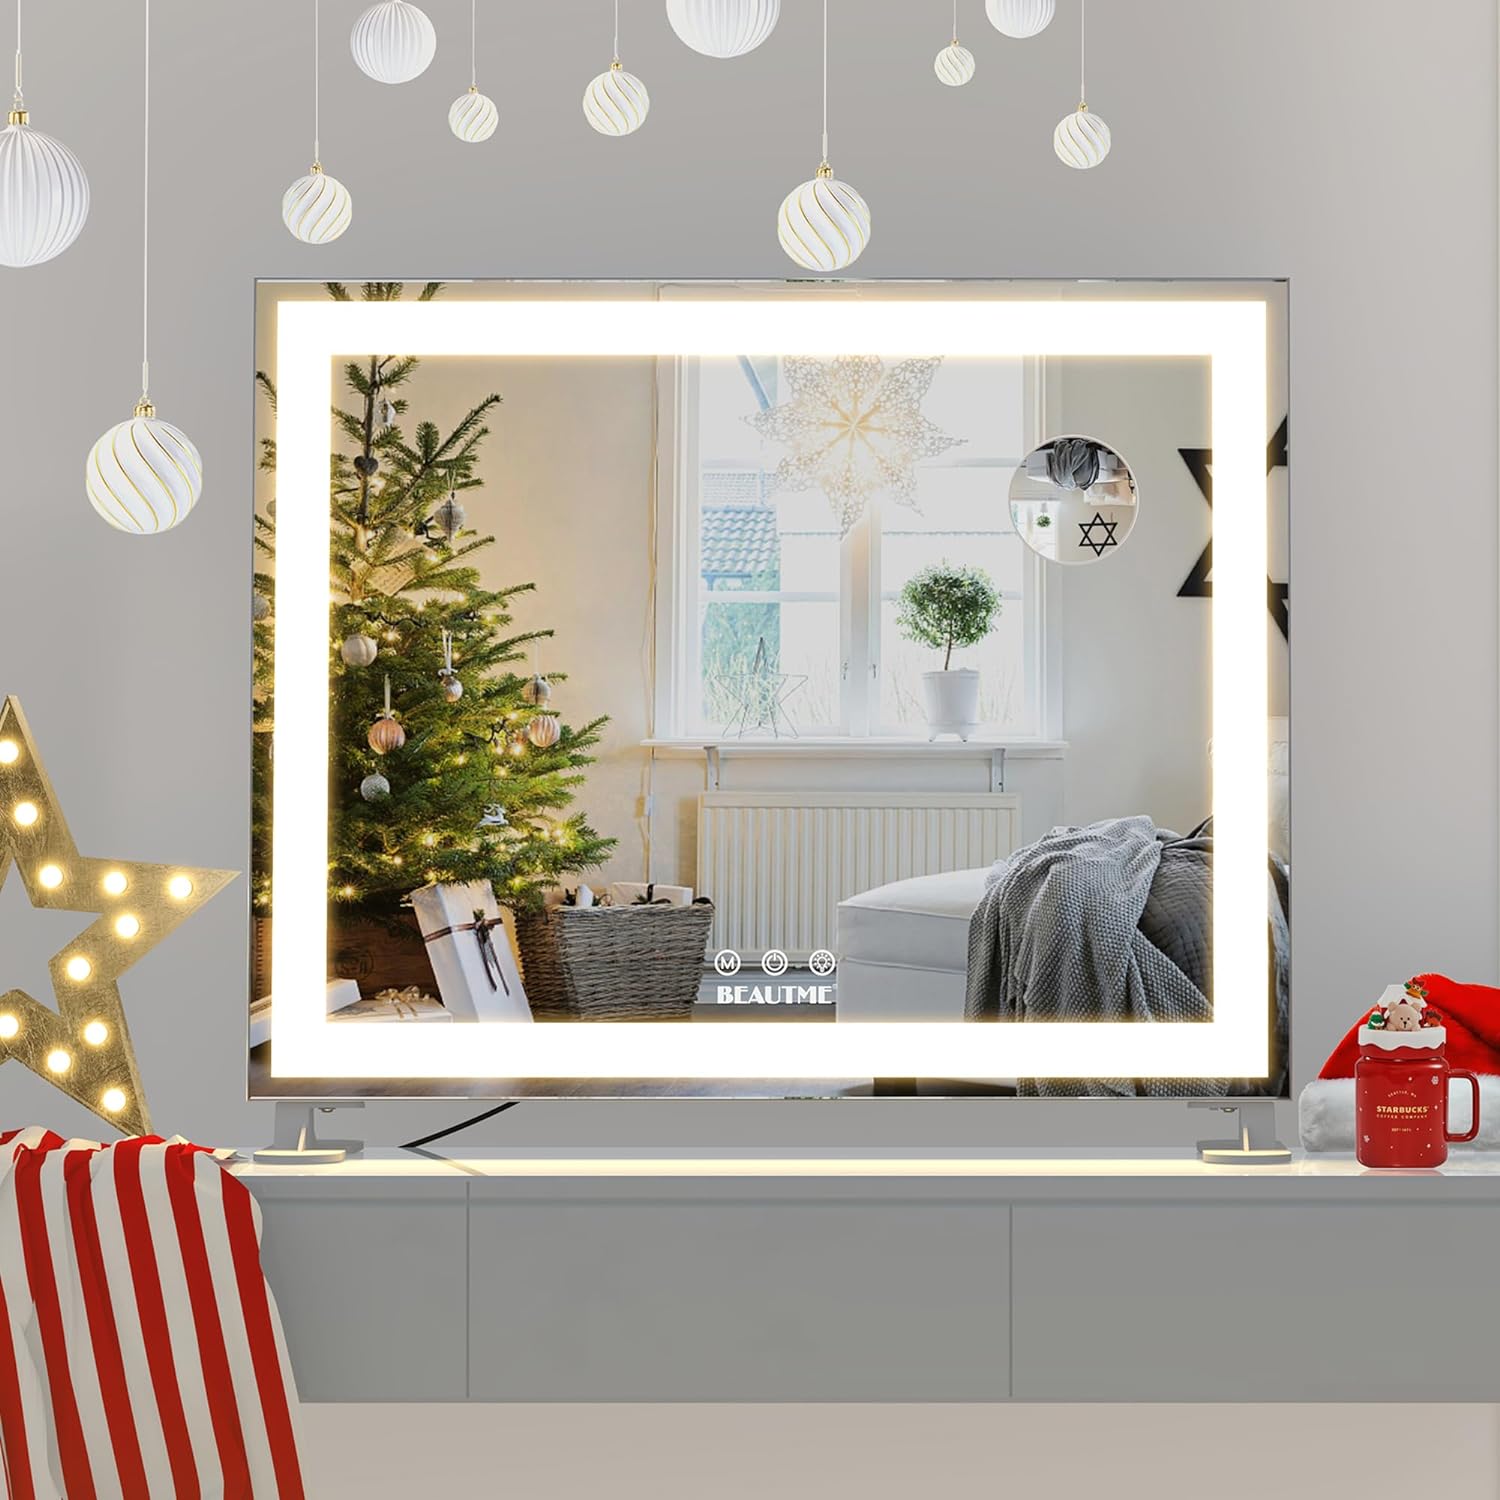 BEAUTME Vanity Mirror 48.5×40.5cm,Tabletop Makeup Mirror,Hollywood Mirror,LED Bedroom Mirror with Lights,Lighted Mirror,Aluminium Frame,Silver